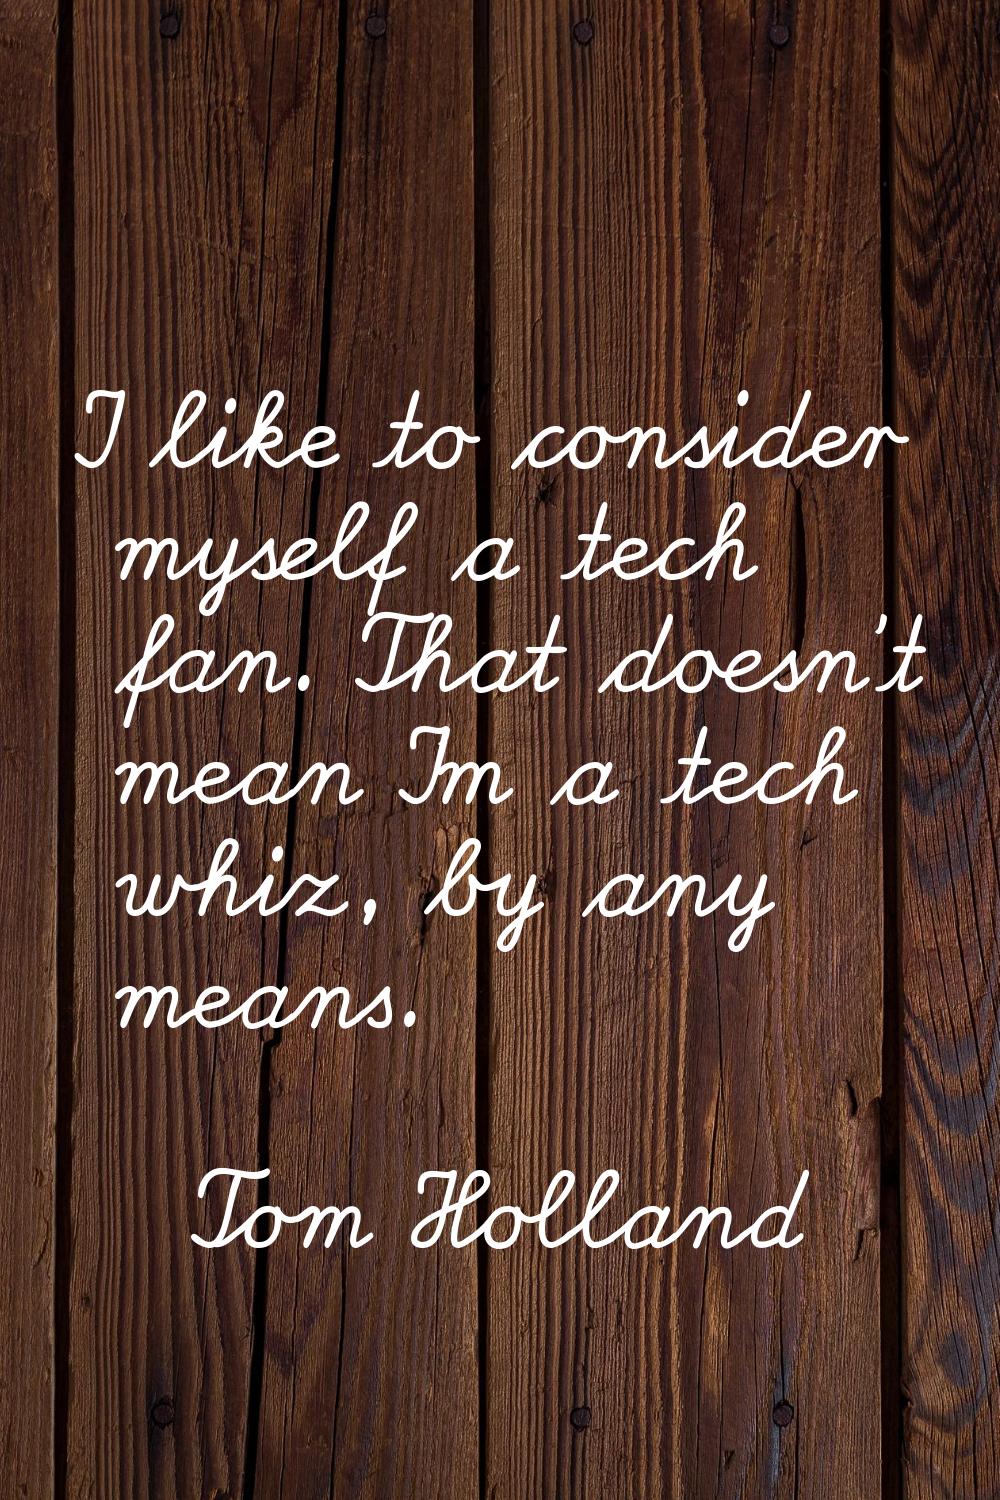 I like to consider myself a tech fan. That doesn't mean I'm a tech whiz, by any means.